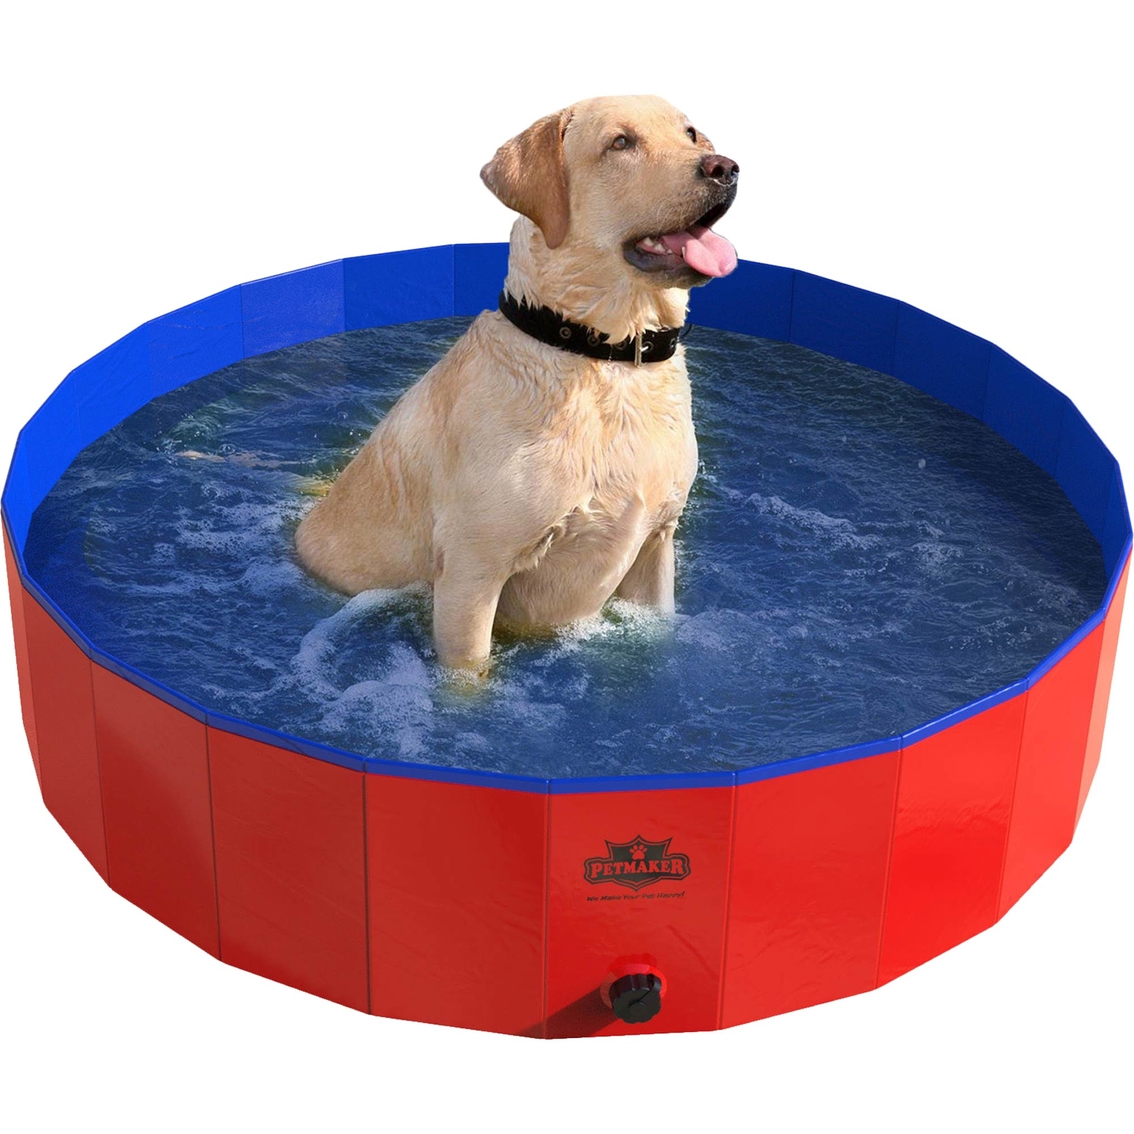 Petmaker Collapsible Pet Dog Pool and Bathing Tub - Image 6 of 8